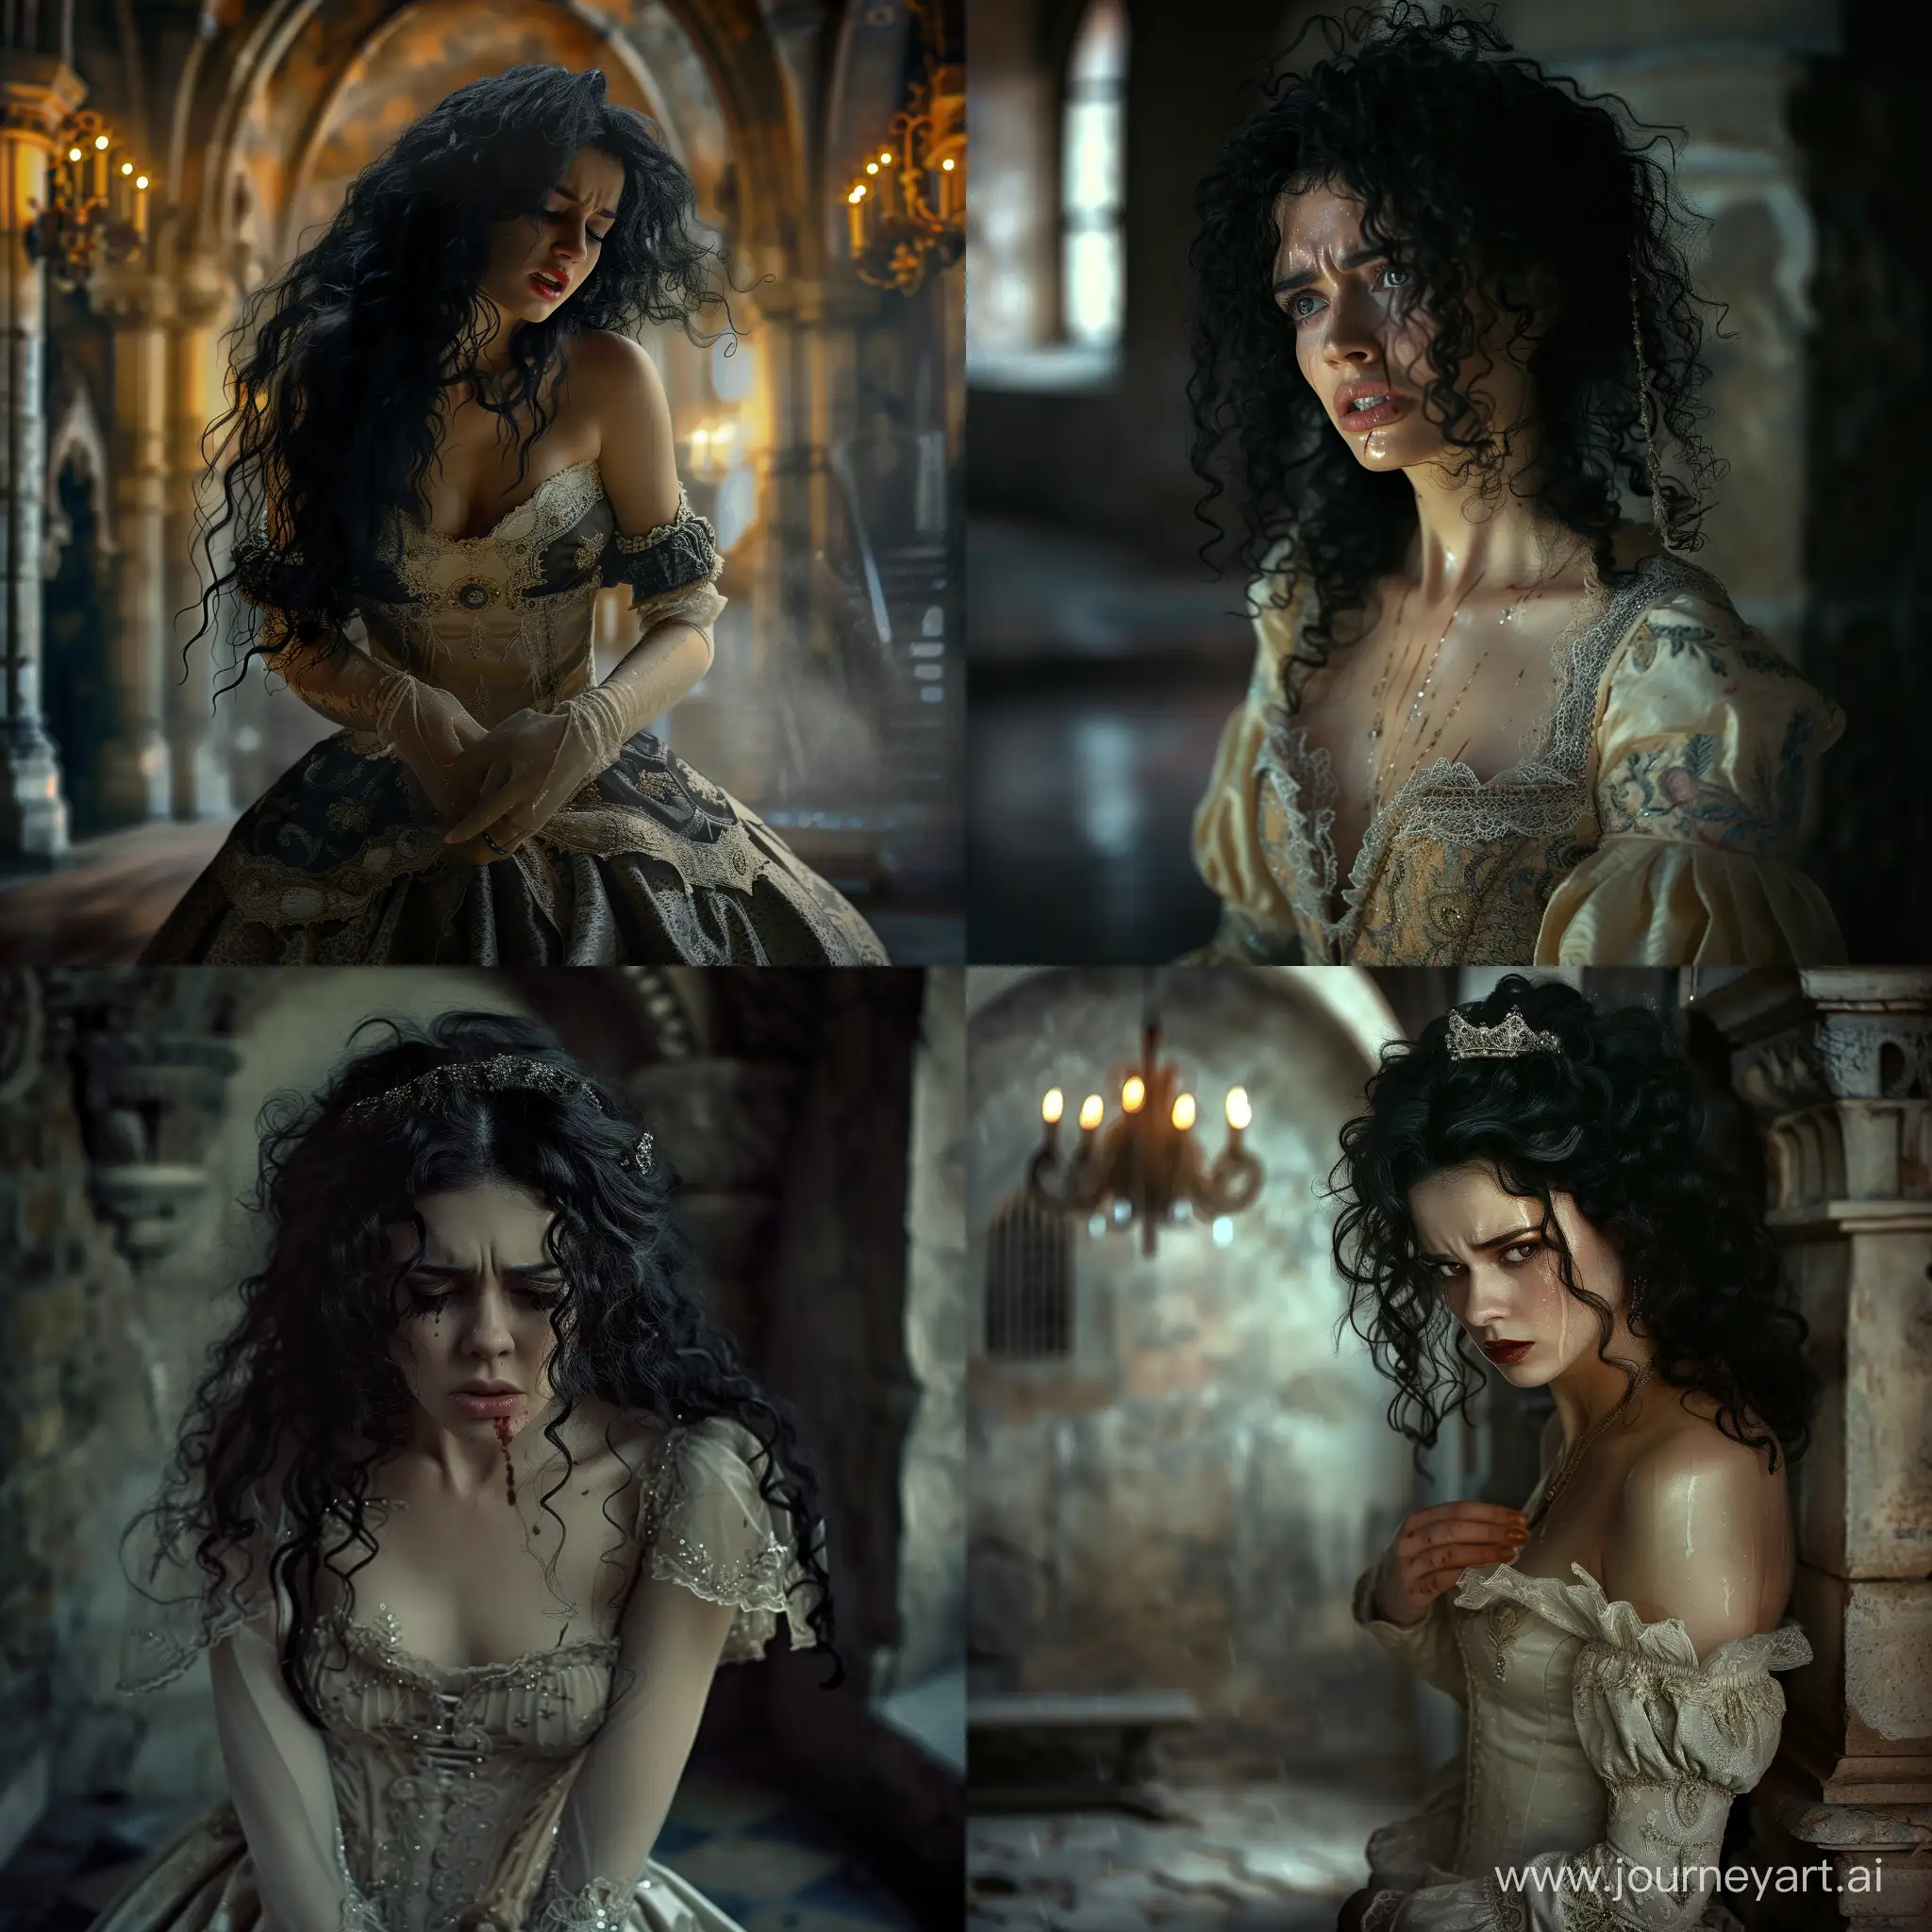 Tormented-Woman-in-Fantasy-Castle-Chamber-with-Black-Curls